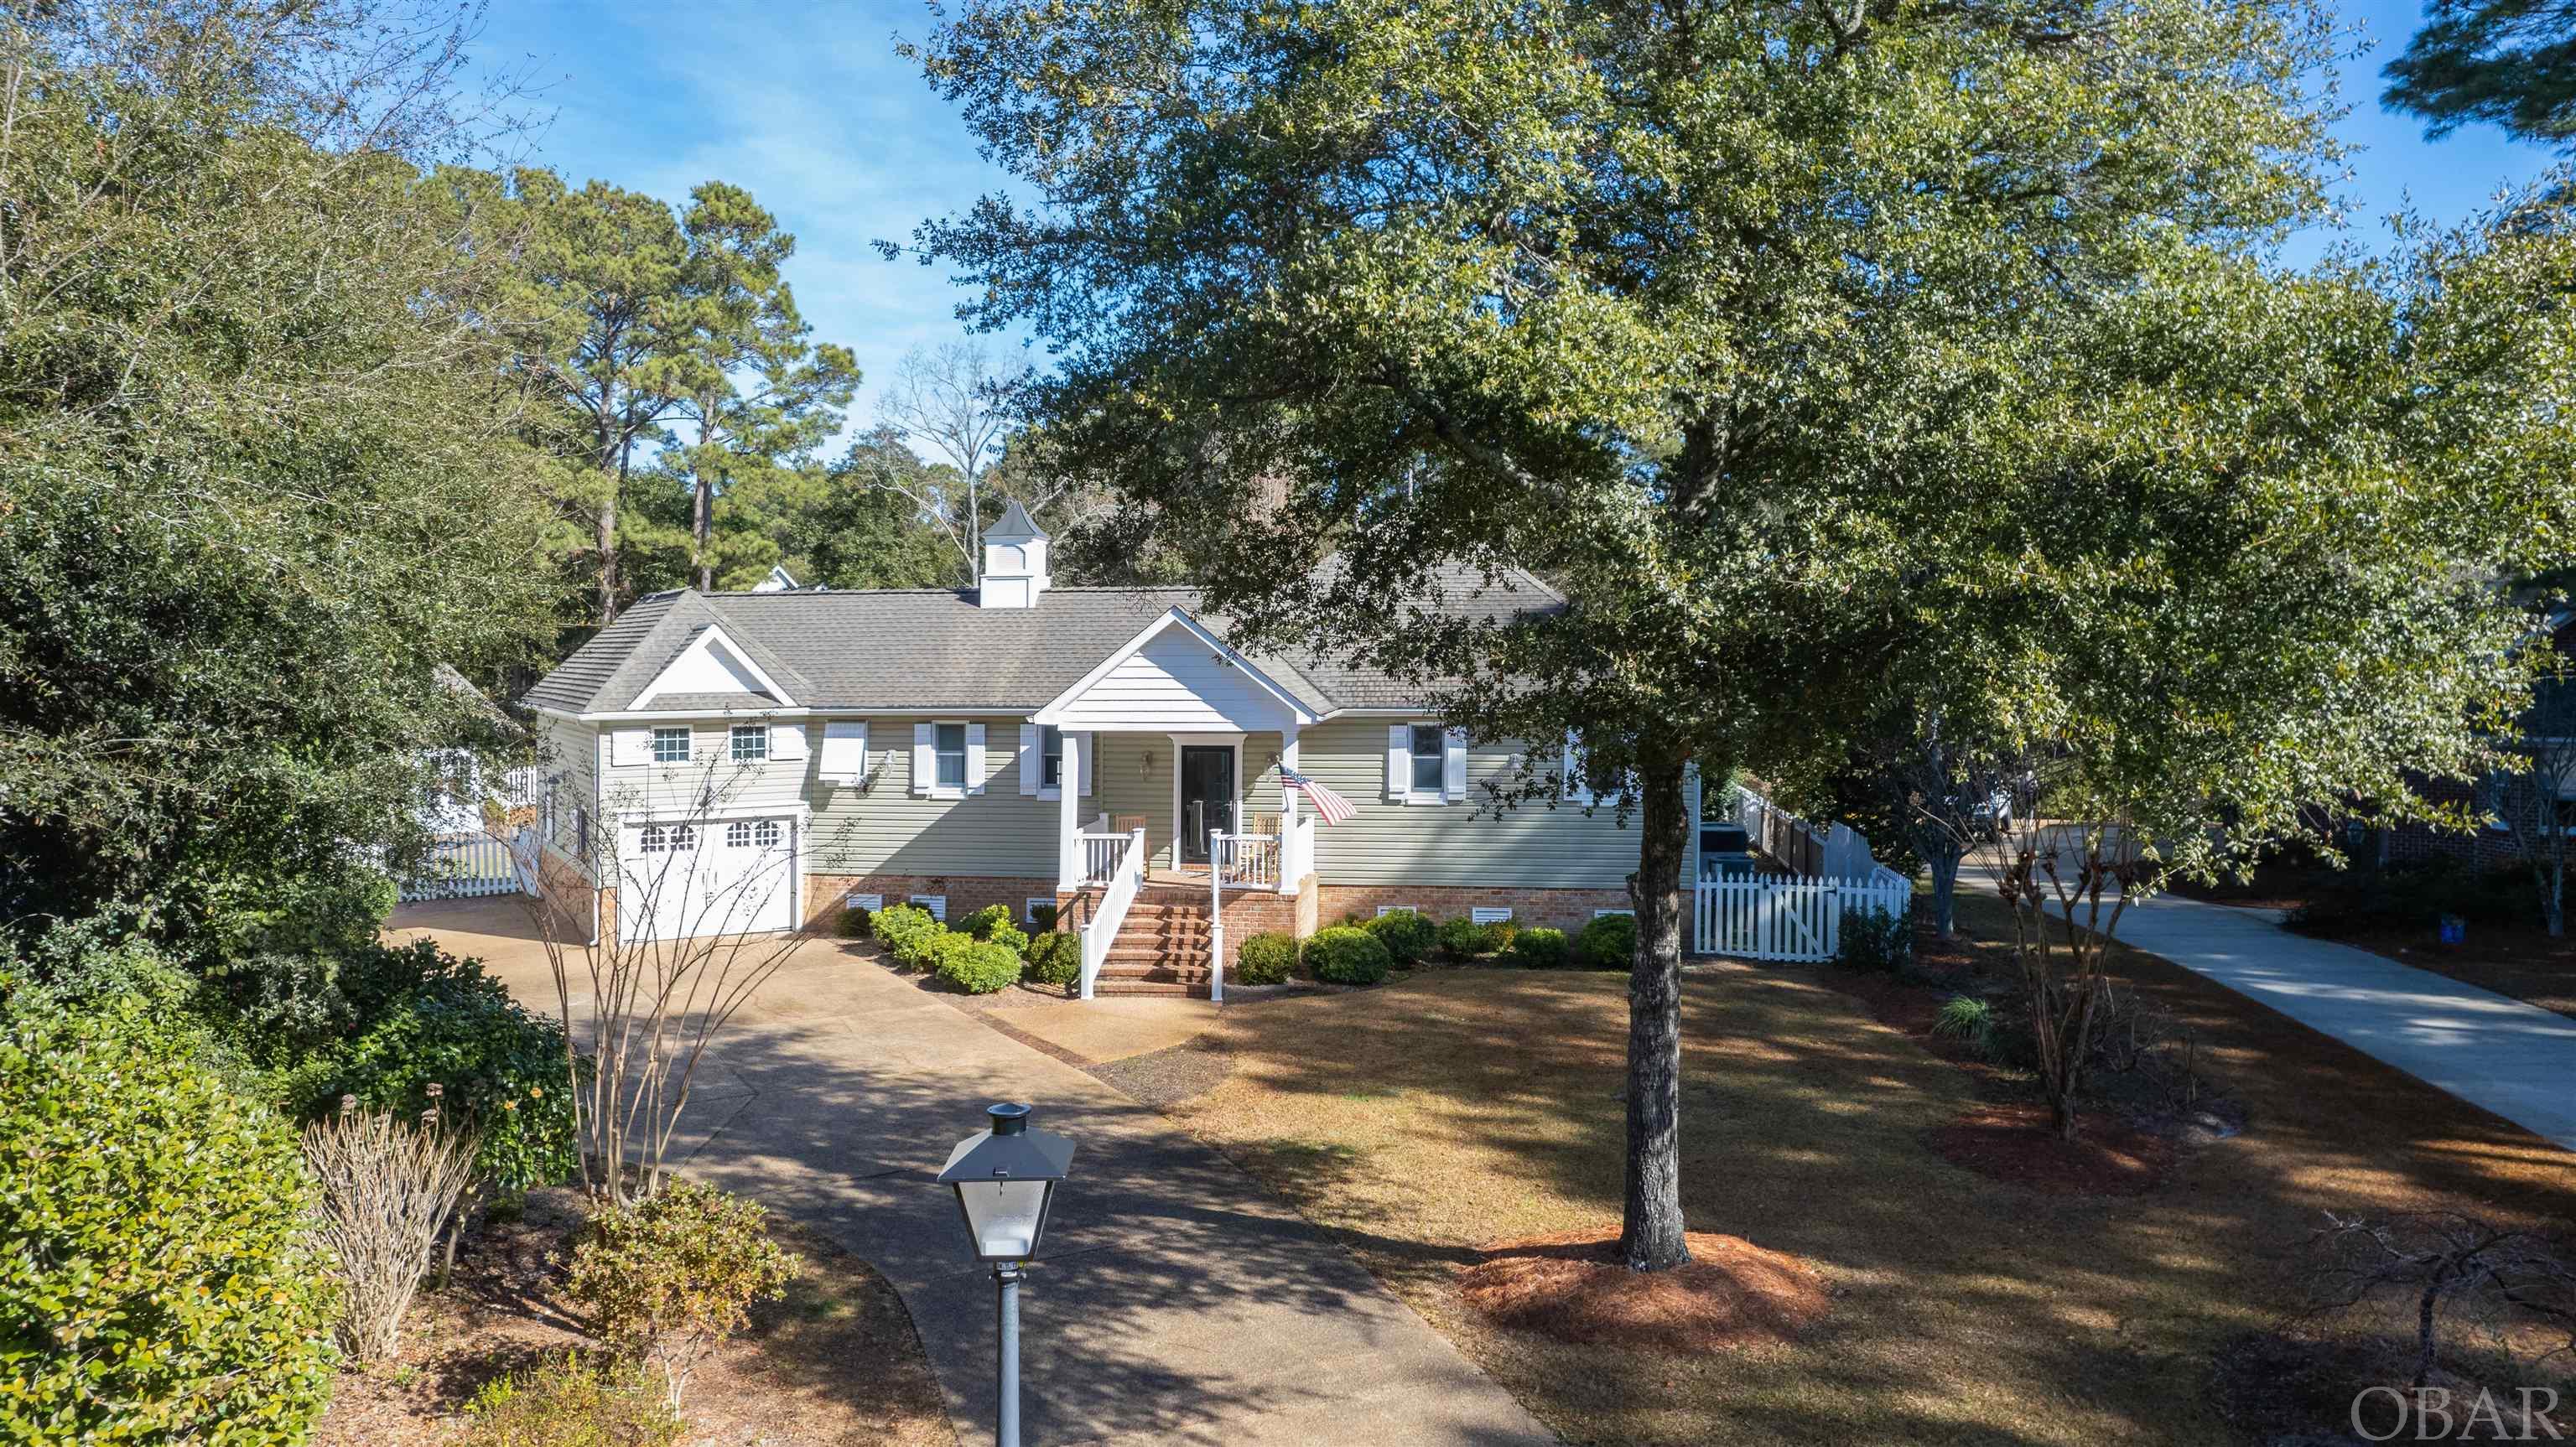 Located on the north end of Roanoke Island. In the Soundfront community of Heritage Point.  Situated on a fenced culture-de-sac lot, this home has large screened porch over looking the pool and private back yard. The non traditional floor plan has one-story living on one side and guest privacy on the other. Separated by an inviting foyer with a sightline to the back of the property, one side of the home features the kitchen with granite counters and island, powder room with pedestal sink, and a full laundry/utility room with pantry. Hickory floors carry from the kitchen into the spacious dining area with a built-in China cabinet, on into the open family room, and through double sweeping doors into the huge Primary en suite boasting 3 oversized cedar closets. The NEW large, private en suite bath with custom tile shower, free standing soaking tub, new floors and cabinets. Just off the bedroom via a glass door is additional storage or office. From the dining area to the back sitting room, glass sliding doors provide indirect natural light in the open are of the home.  The Pool was resurfaced in the summer 2021 with new salt system and heater.  Nothing left to do but enjoy!! A true one-of-a kind property, this special home would be ideal for retirement living or as a second home. Heritage Point offers a private pier, tennis courts, boat ramp and easy access to the multi-use path leading to Manteo. Close to shopping, dining, and historic Manteo, yet tucked far enough away from the hustle, this special home is one to surely create special memories.